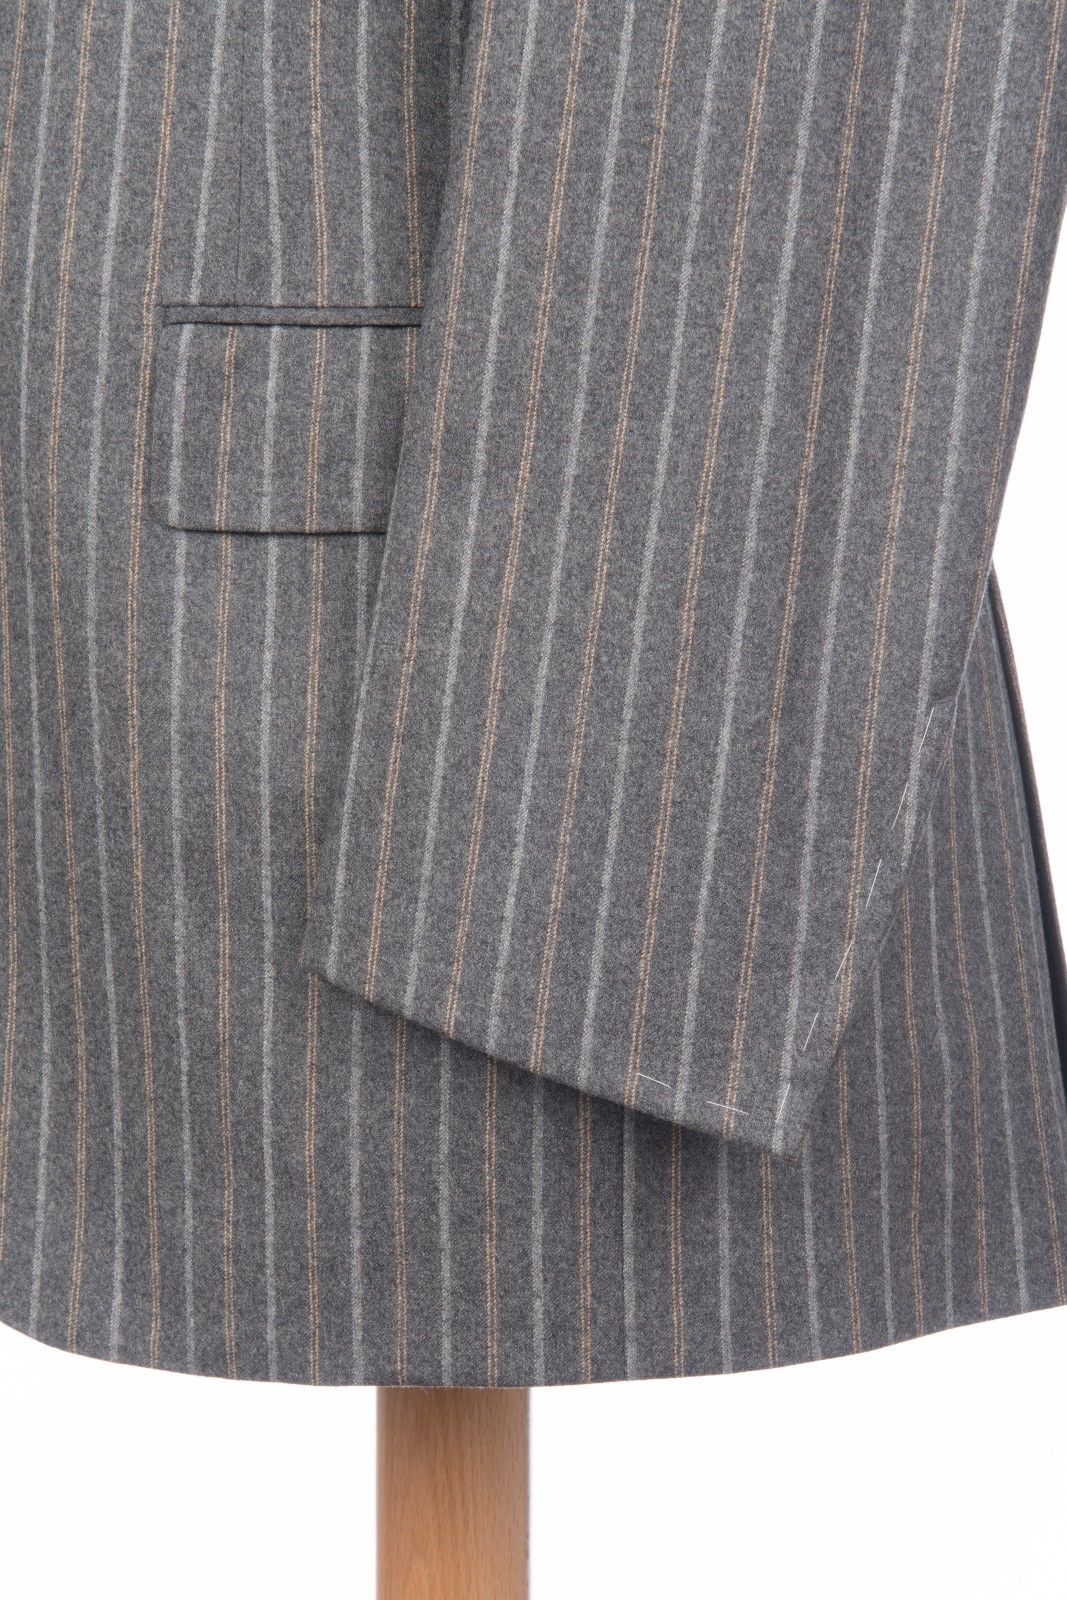 $4290 D'AVENZA Grey Wool 120's Striped Suit Hand-Sewn in Italy ...